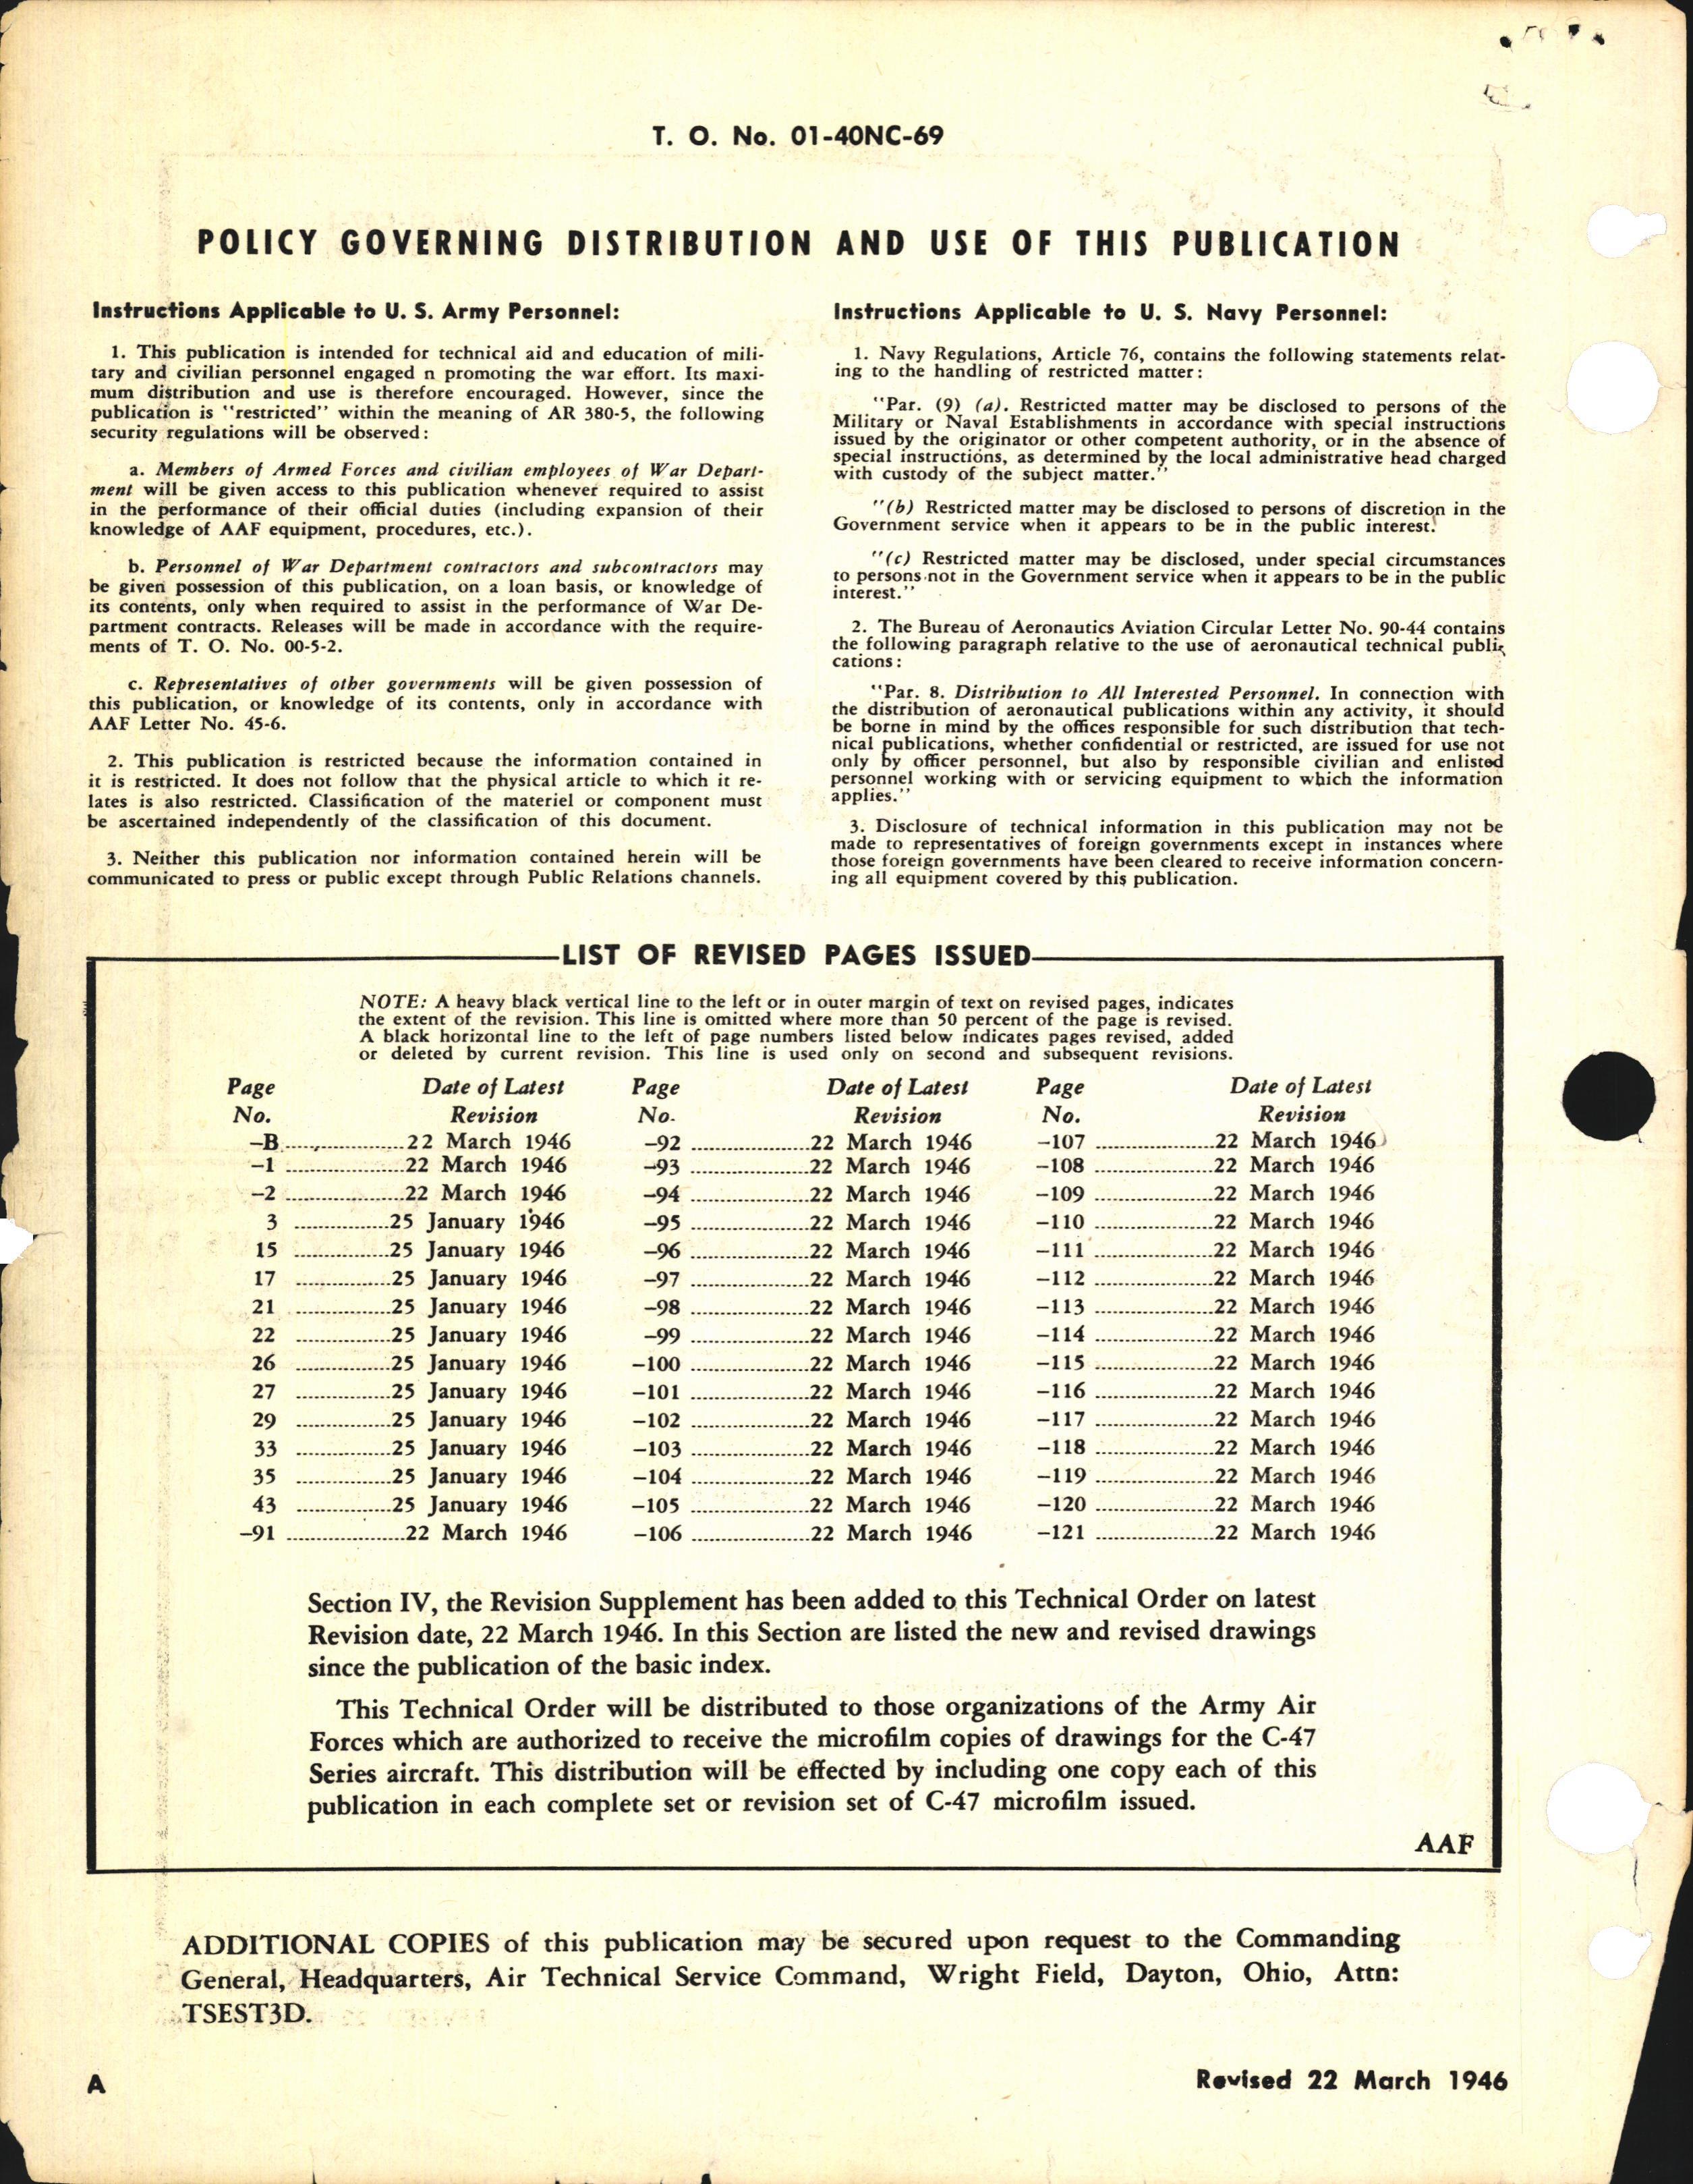 Sample page 2 from AirCorps Library document: Index of Drawings on Microfilm for C-47